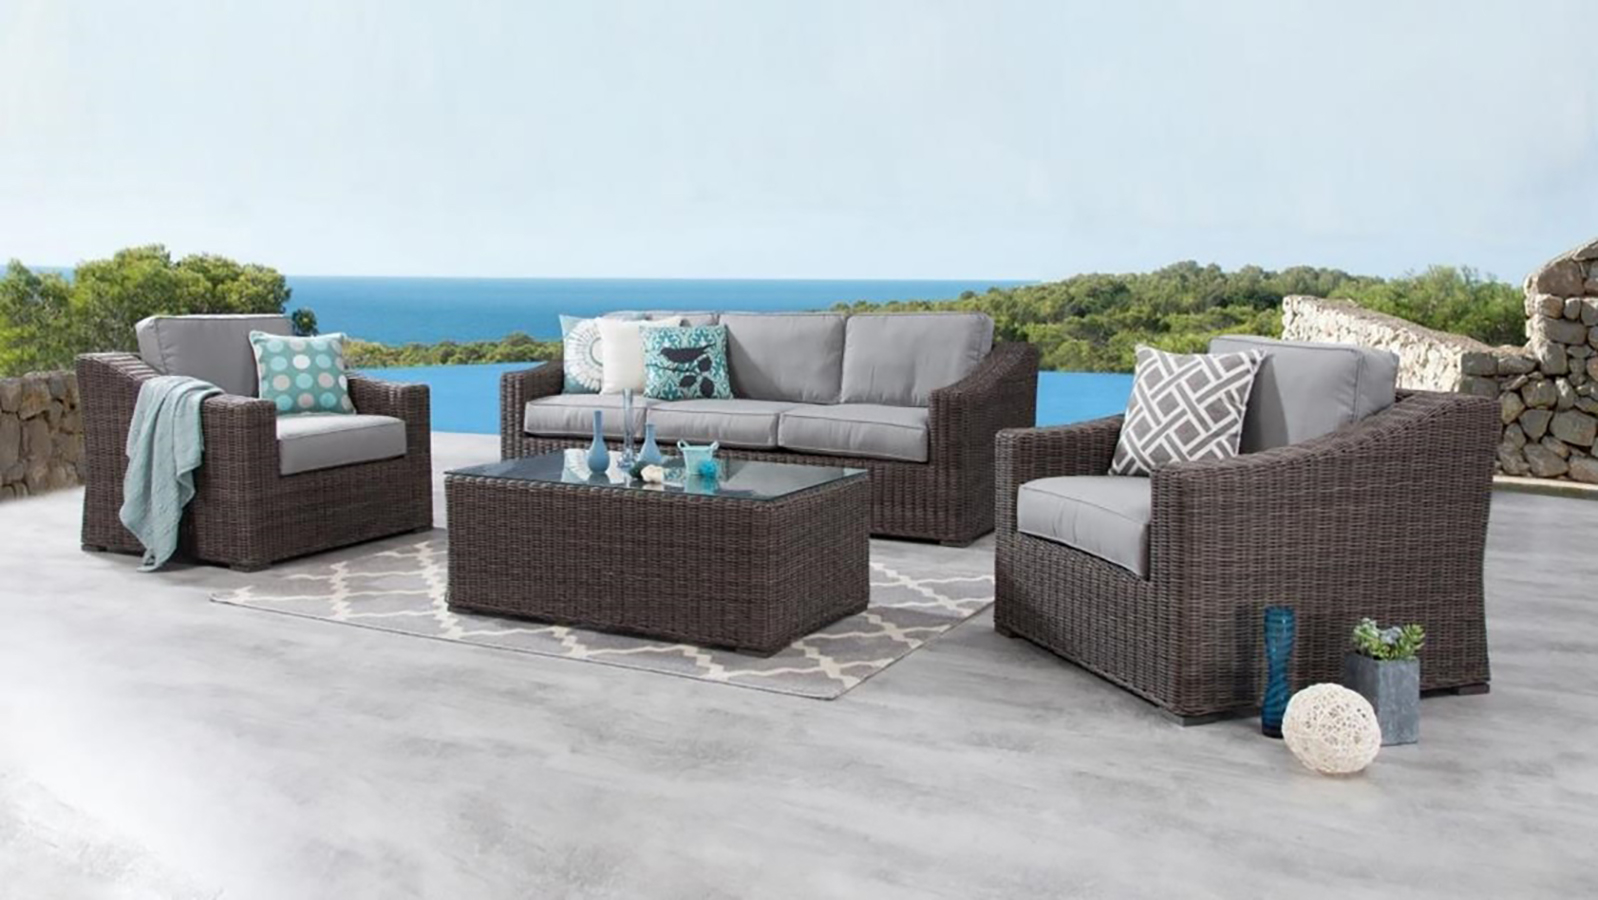 Canyon Patio Furniture Collection Crown Spas Pools Winnipeg within sizing 1598 X 900